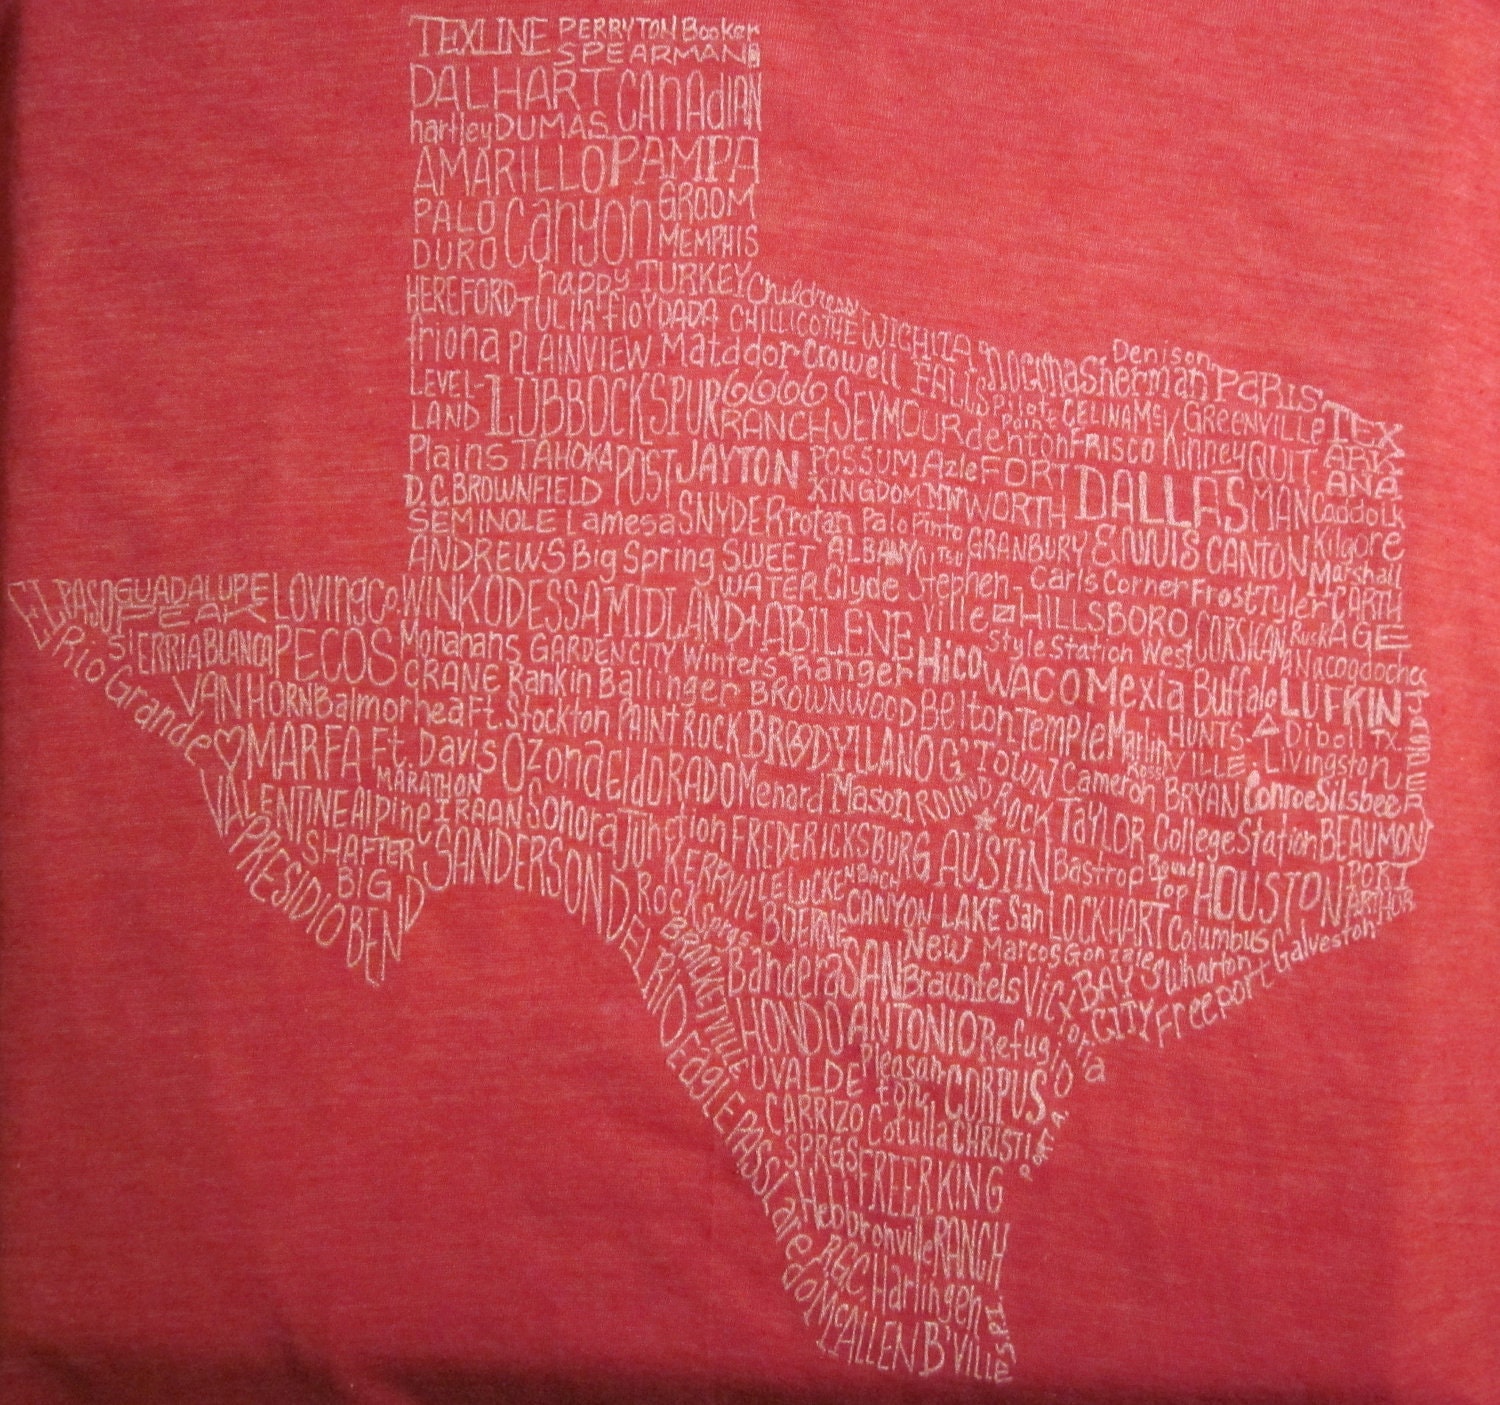 Texas City T-shirt  -   "I've Been Everywhere" - Red Heather Blend